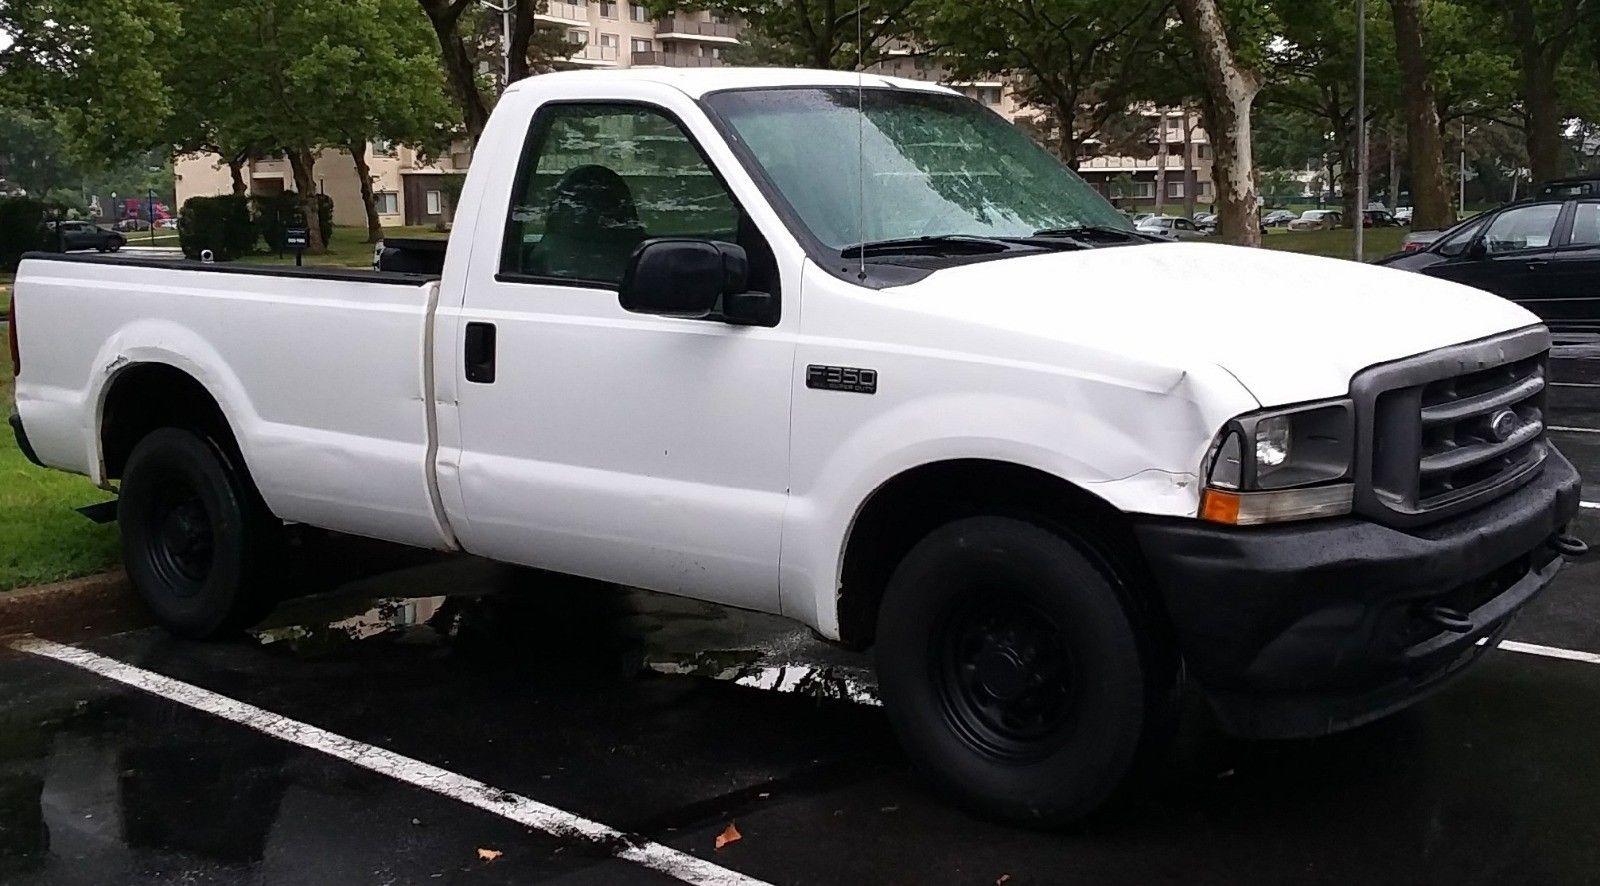 decent mileage 2004 Ford F 350 XL Super duty pickup for sale 2004 F350 Super Duty Towing Capacity